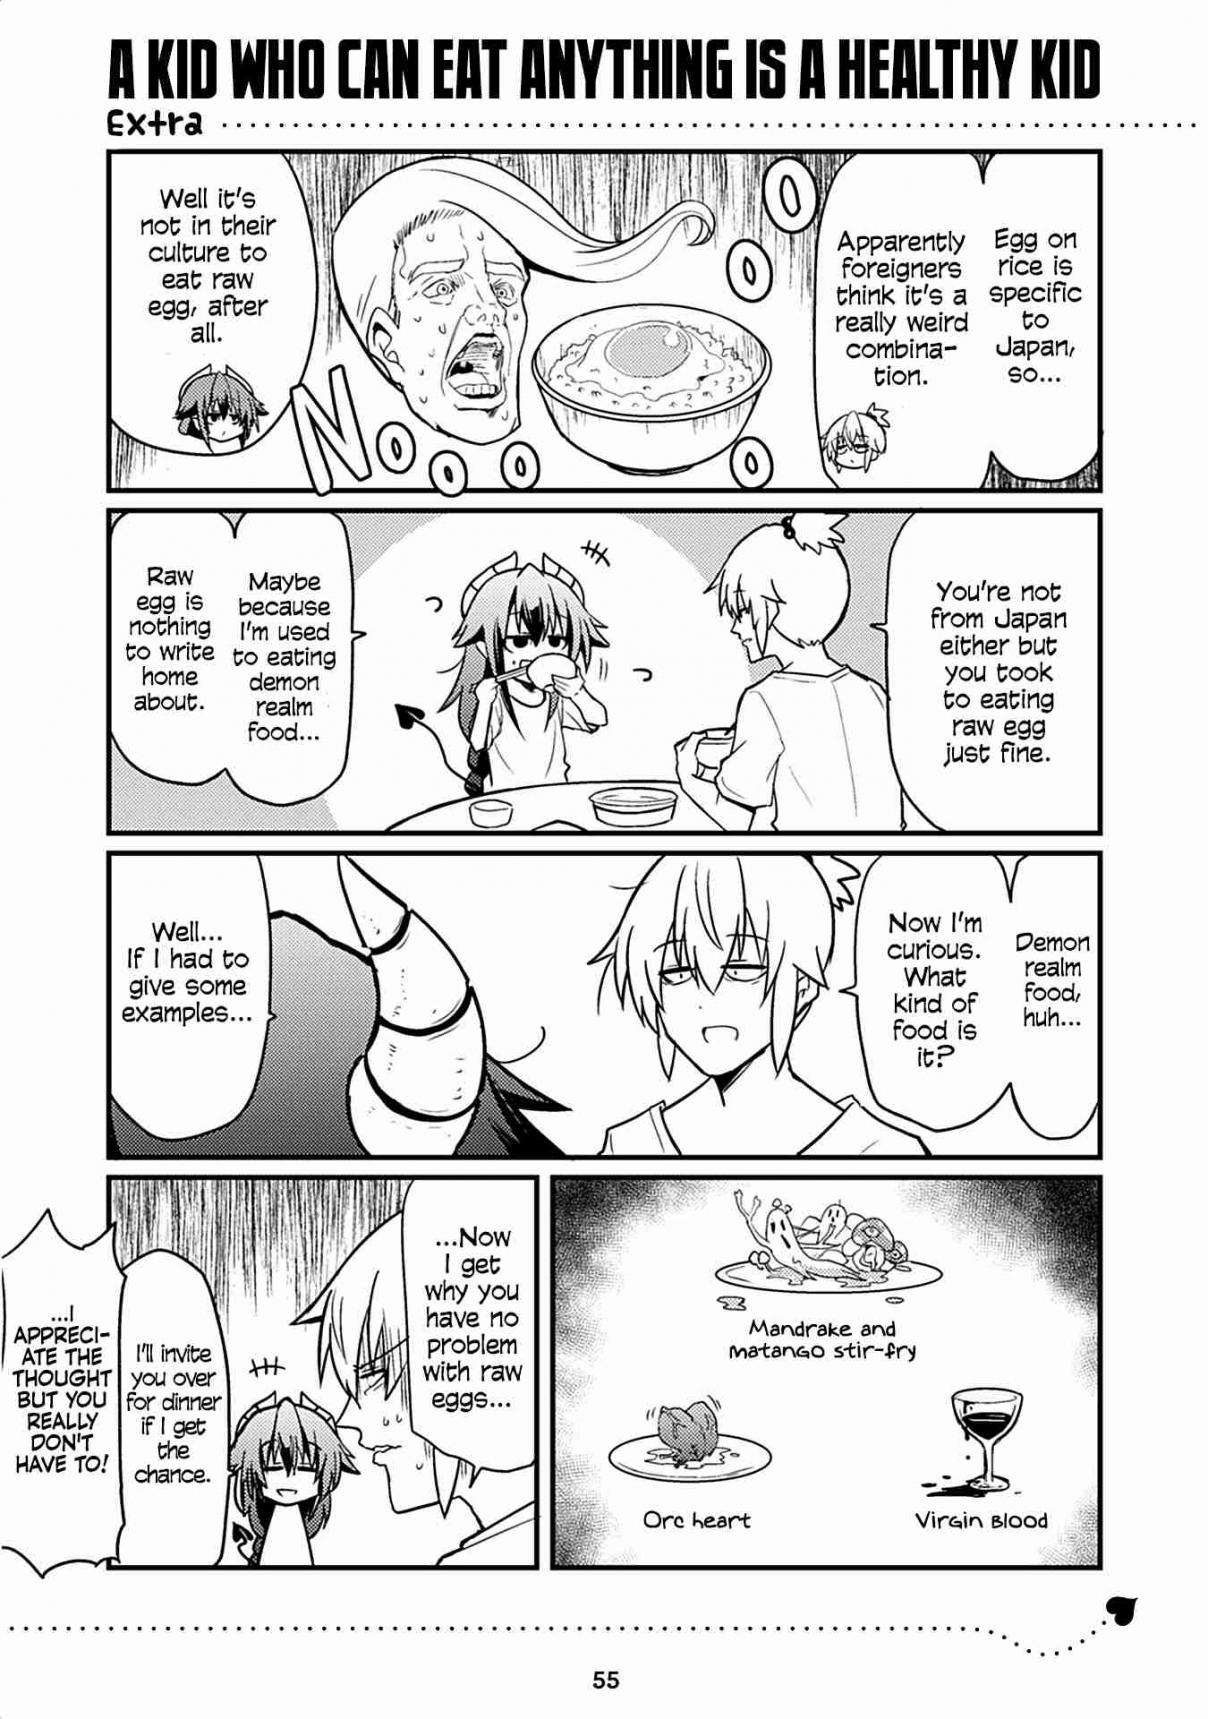 Naughty Succubus "Saki chan" Vol. 1 Ch. 48.5 A kid who can eat anything is a healthy kid